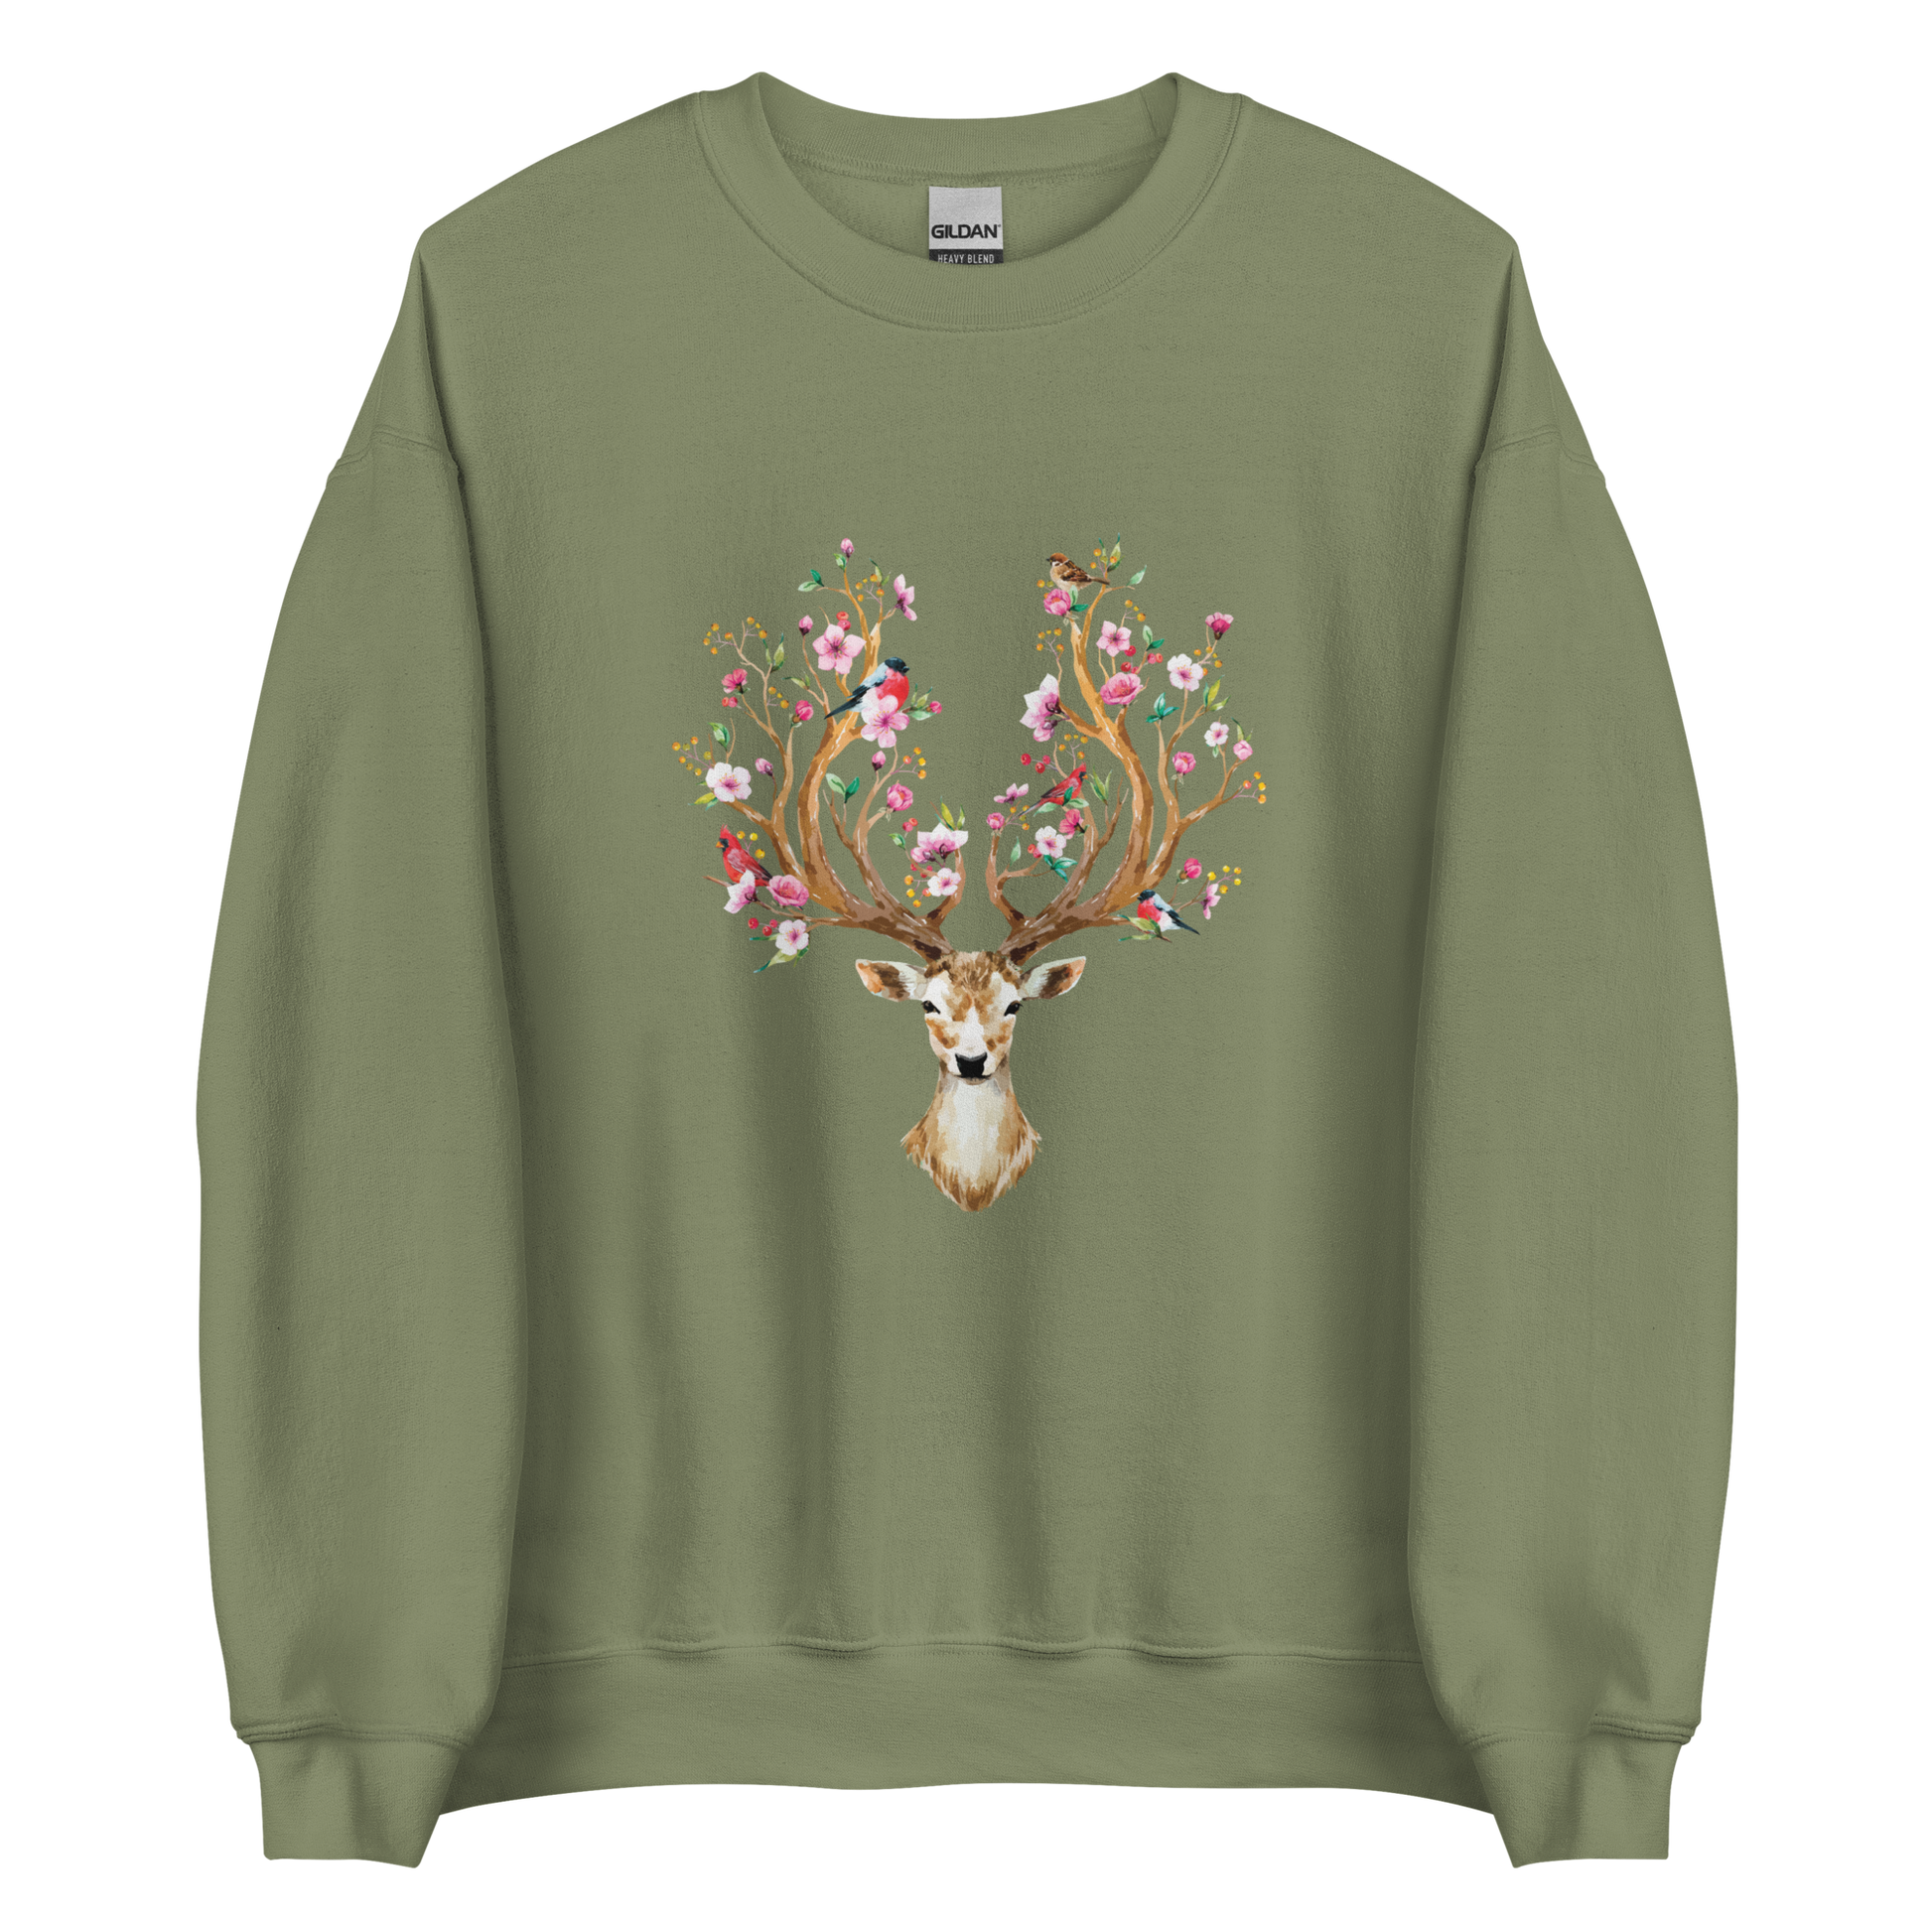 Military Green Floral Red Deer Sweatshirt featuring a delightful Floral Deer graphic on the chest - Cute Graphic Deer Sweatshirts - Boozy Fox